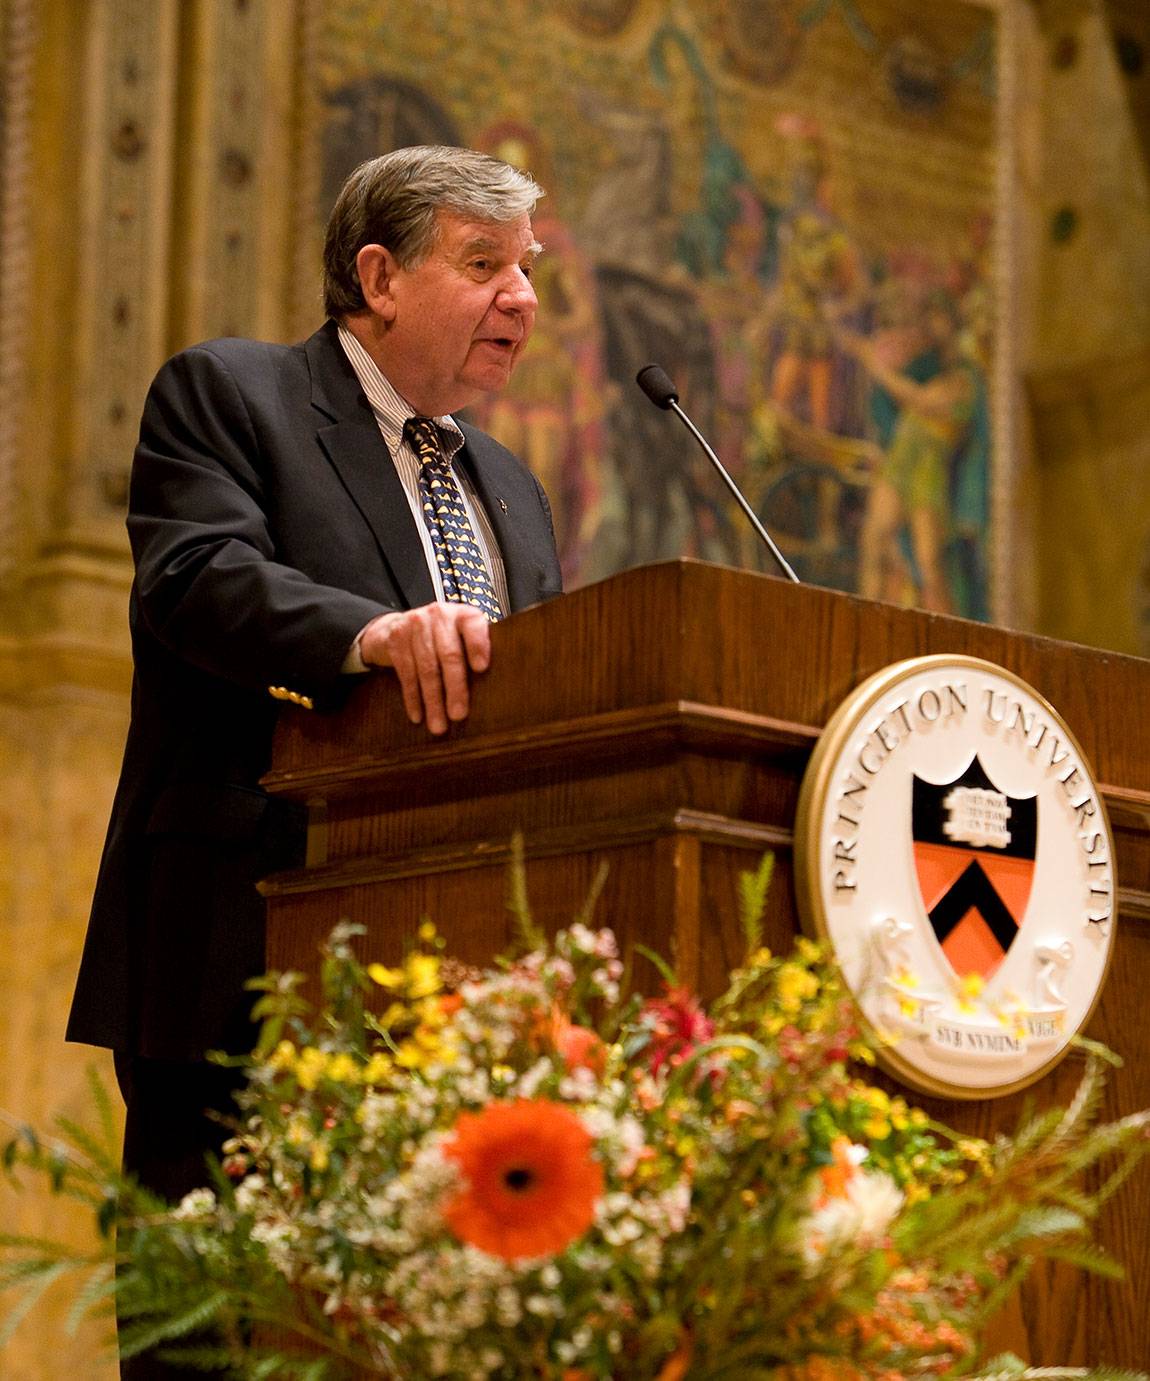 Princeton President Emeritus William G. Bowen recognized with the 2008 José Vasconcelos World Award of Education from the World Cultural Council